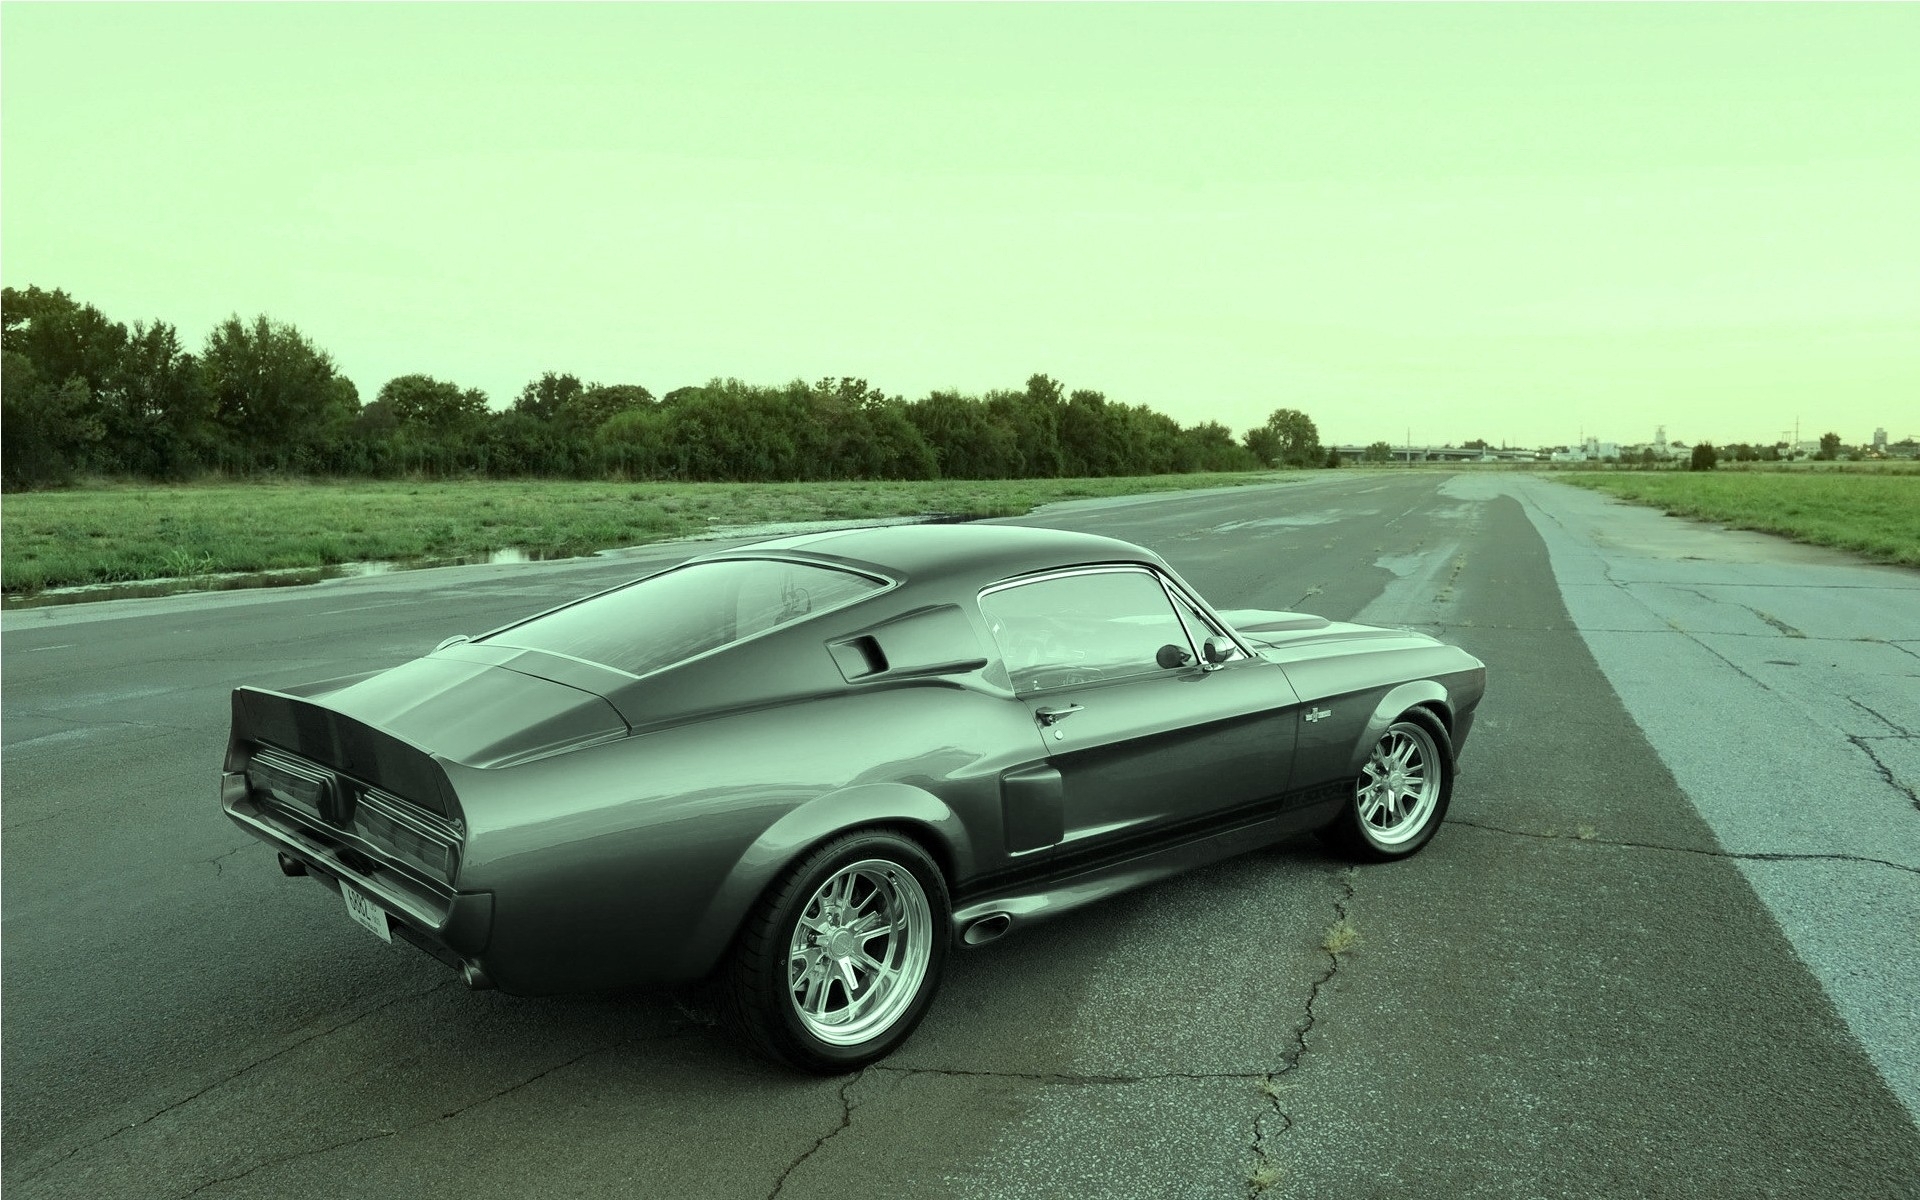 ford, Muscle, Cars, Classic, Vehicles, Ford, Mustang, Automobiles Wallpaper